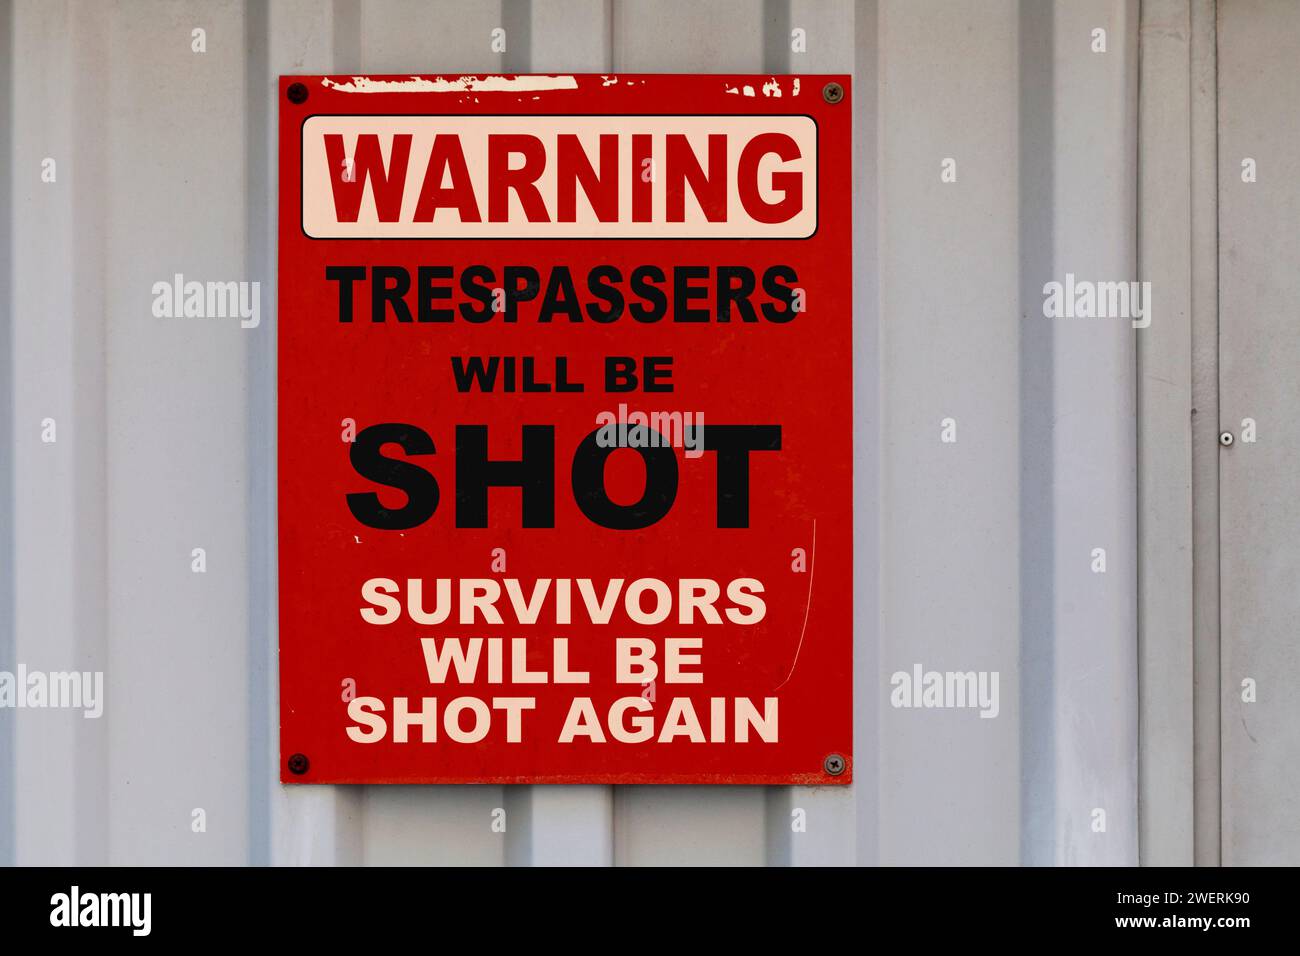 Warning sign drawn on a dark red placard with written in 'Warning - Trespassers will be shot, survivors will be shot again'. Stock Photo